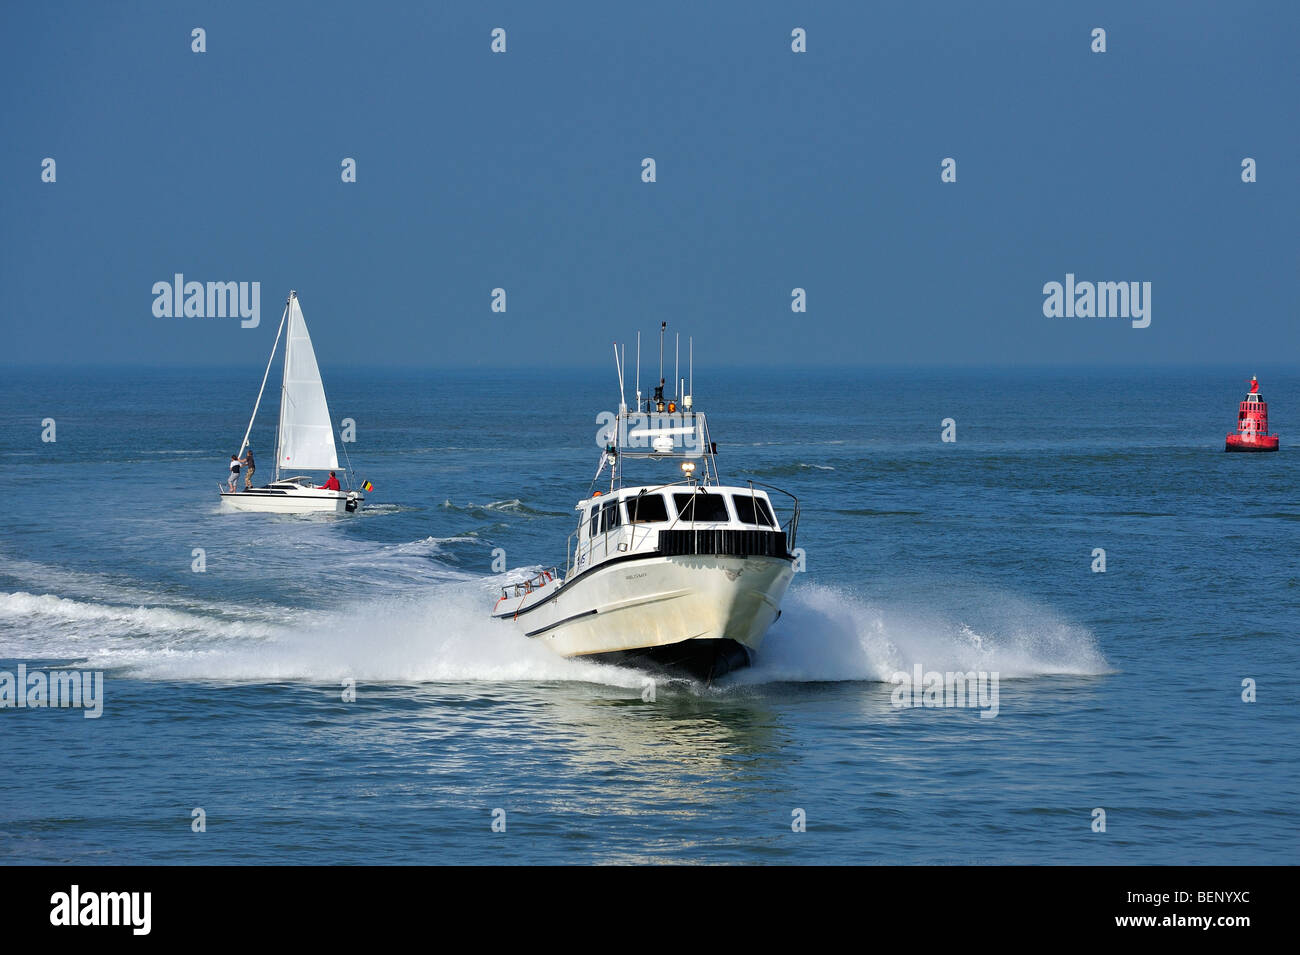 Motorboat / cabin cruiser and sailing boat on the North Sea Stock Photo